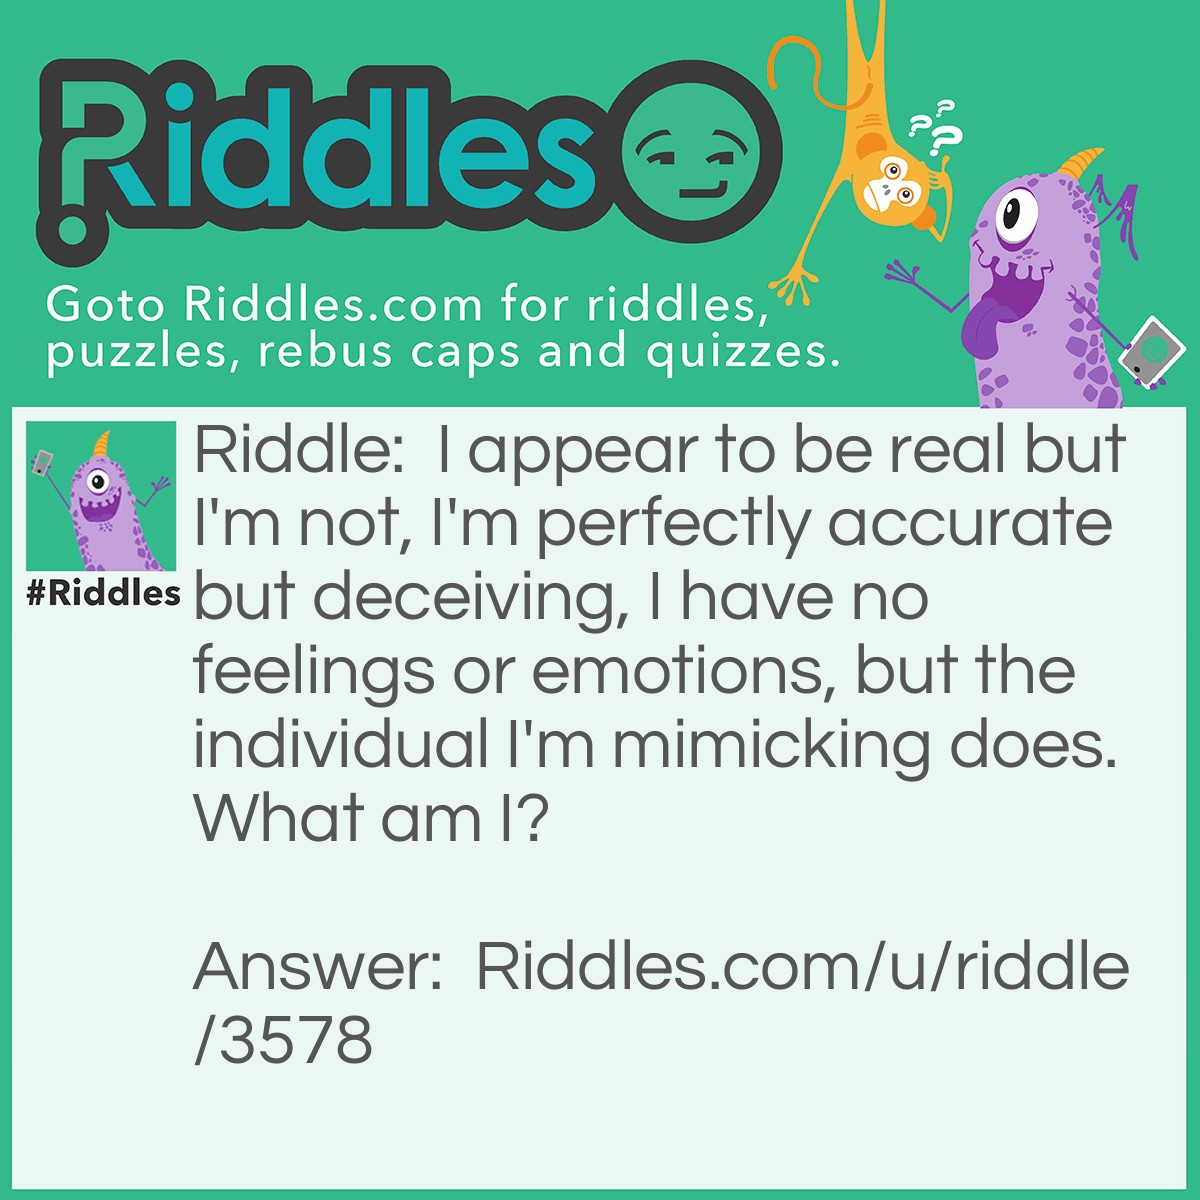 Riddle: I appear to be real but I'm not, I'm perfectly accurate but deceiving, I have no feelings or emotions, but the individual I'm mimicking does. What am I? Answer: Your reflection in the mirror.